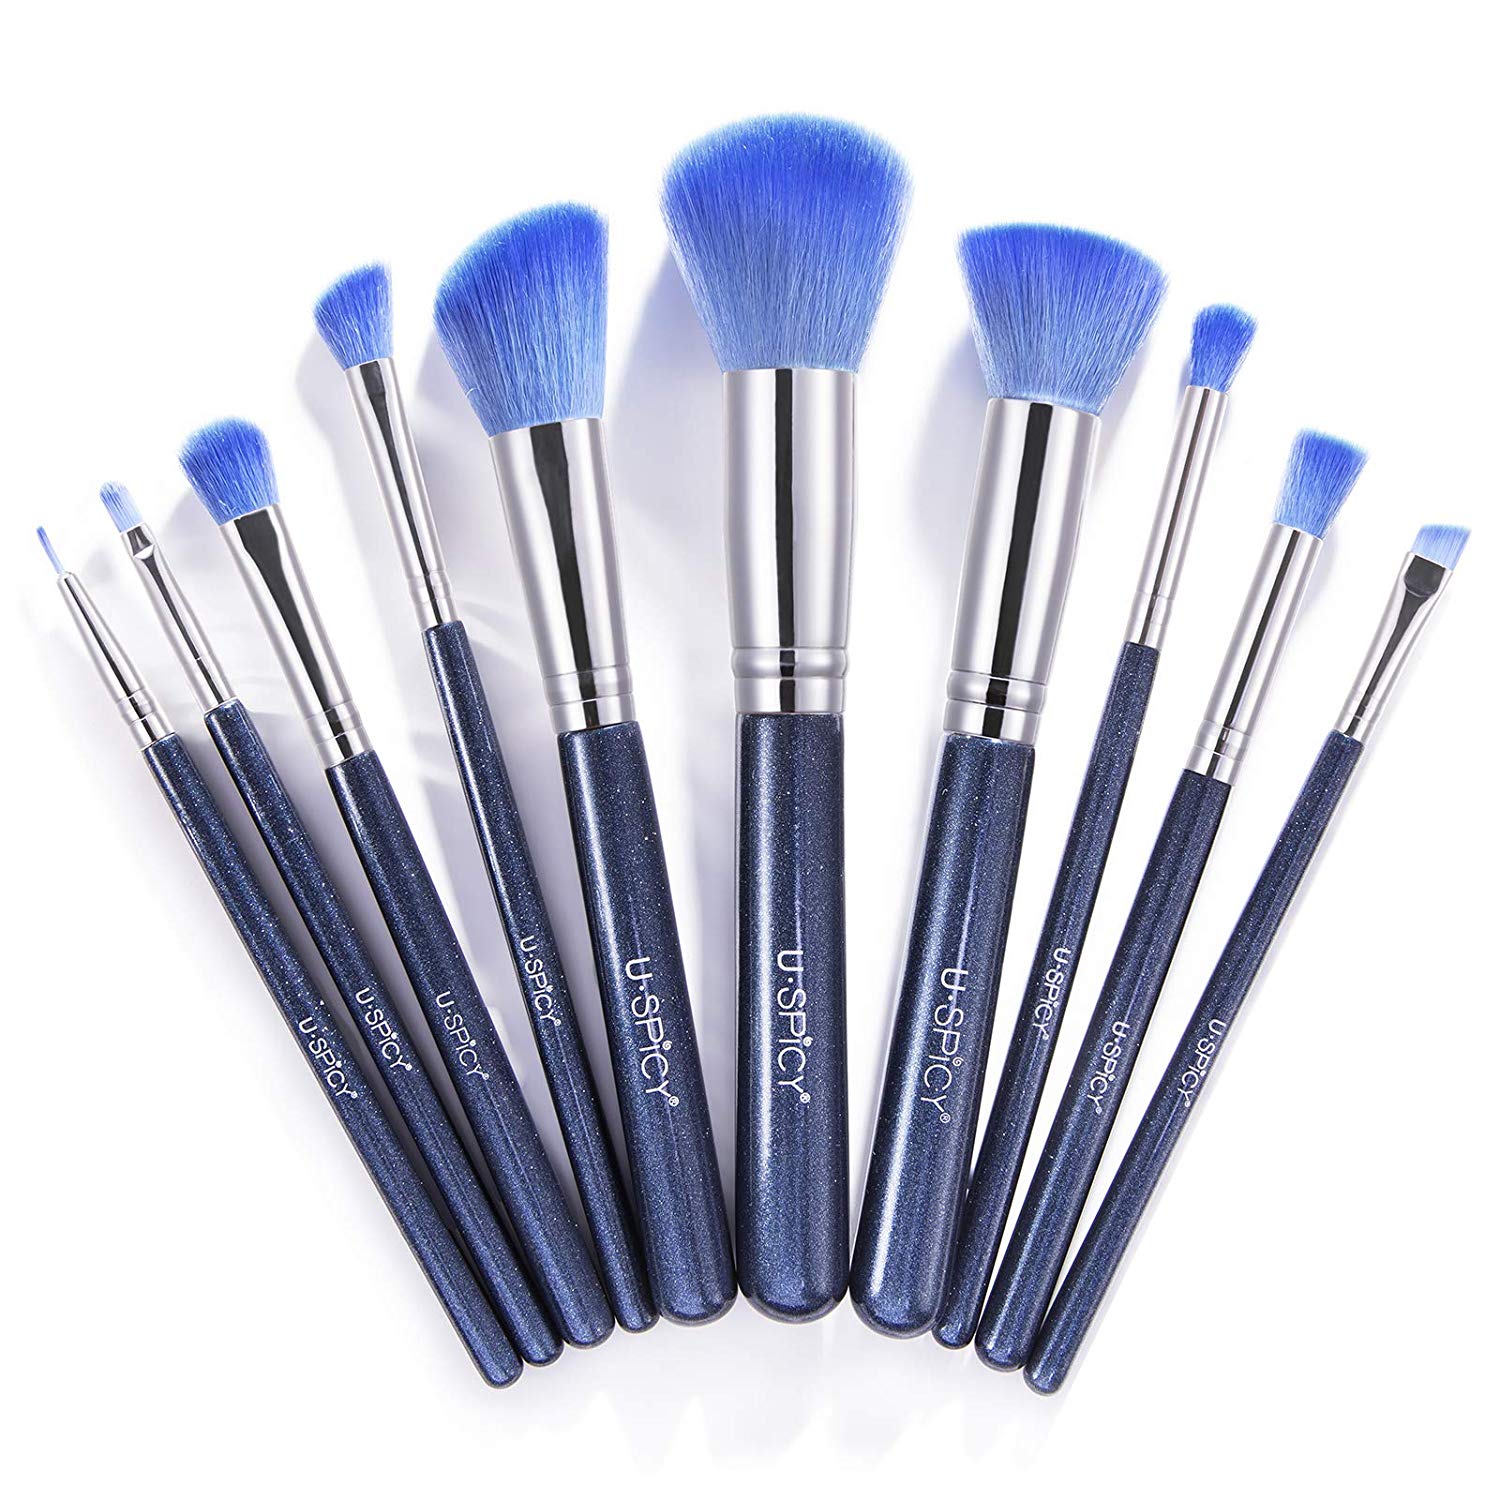 USpicy Makeup Brushes Set Professional Cosmetics 10 Piece Makeup Brush Set Beauty Brushes with Synthetic and Vegan Bristles